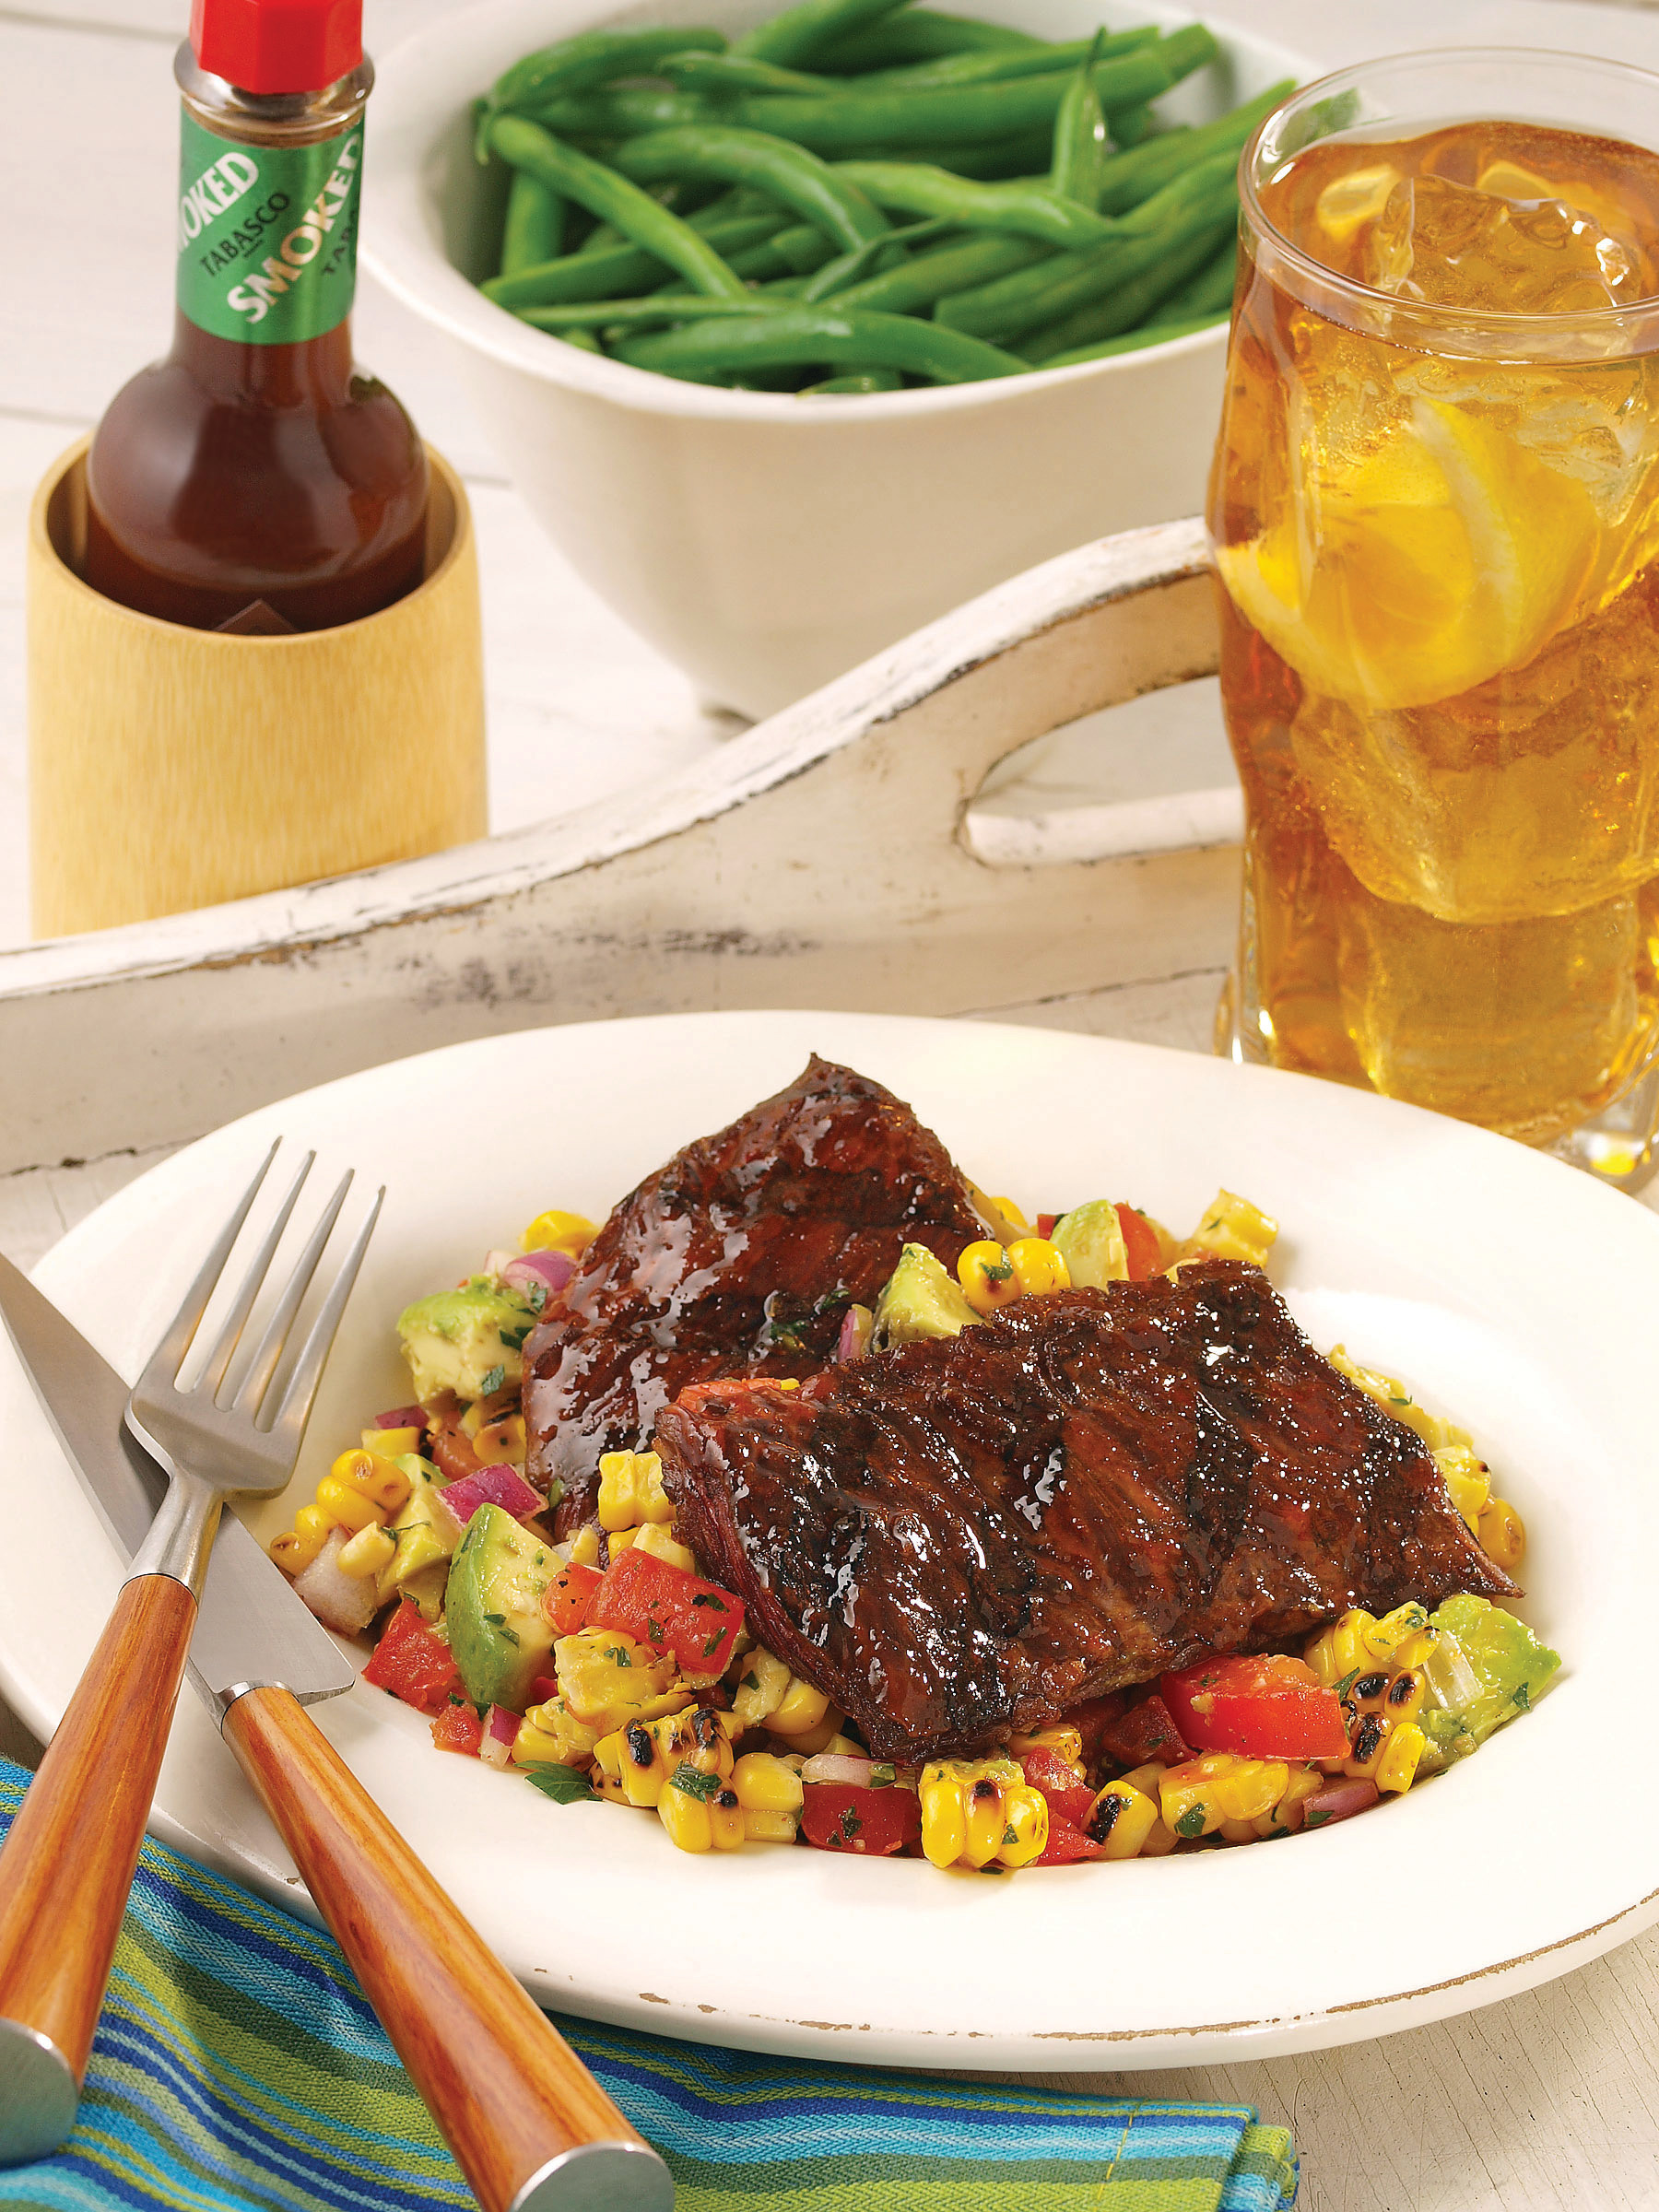 A quick and easy chipotle marinated grilled skirt steak will spice up any gathering. Pair it with a roasted corn salad that embodies the fresh flavors of the season — a mixture of corn, tomato, red onion, basil, and avocado.